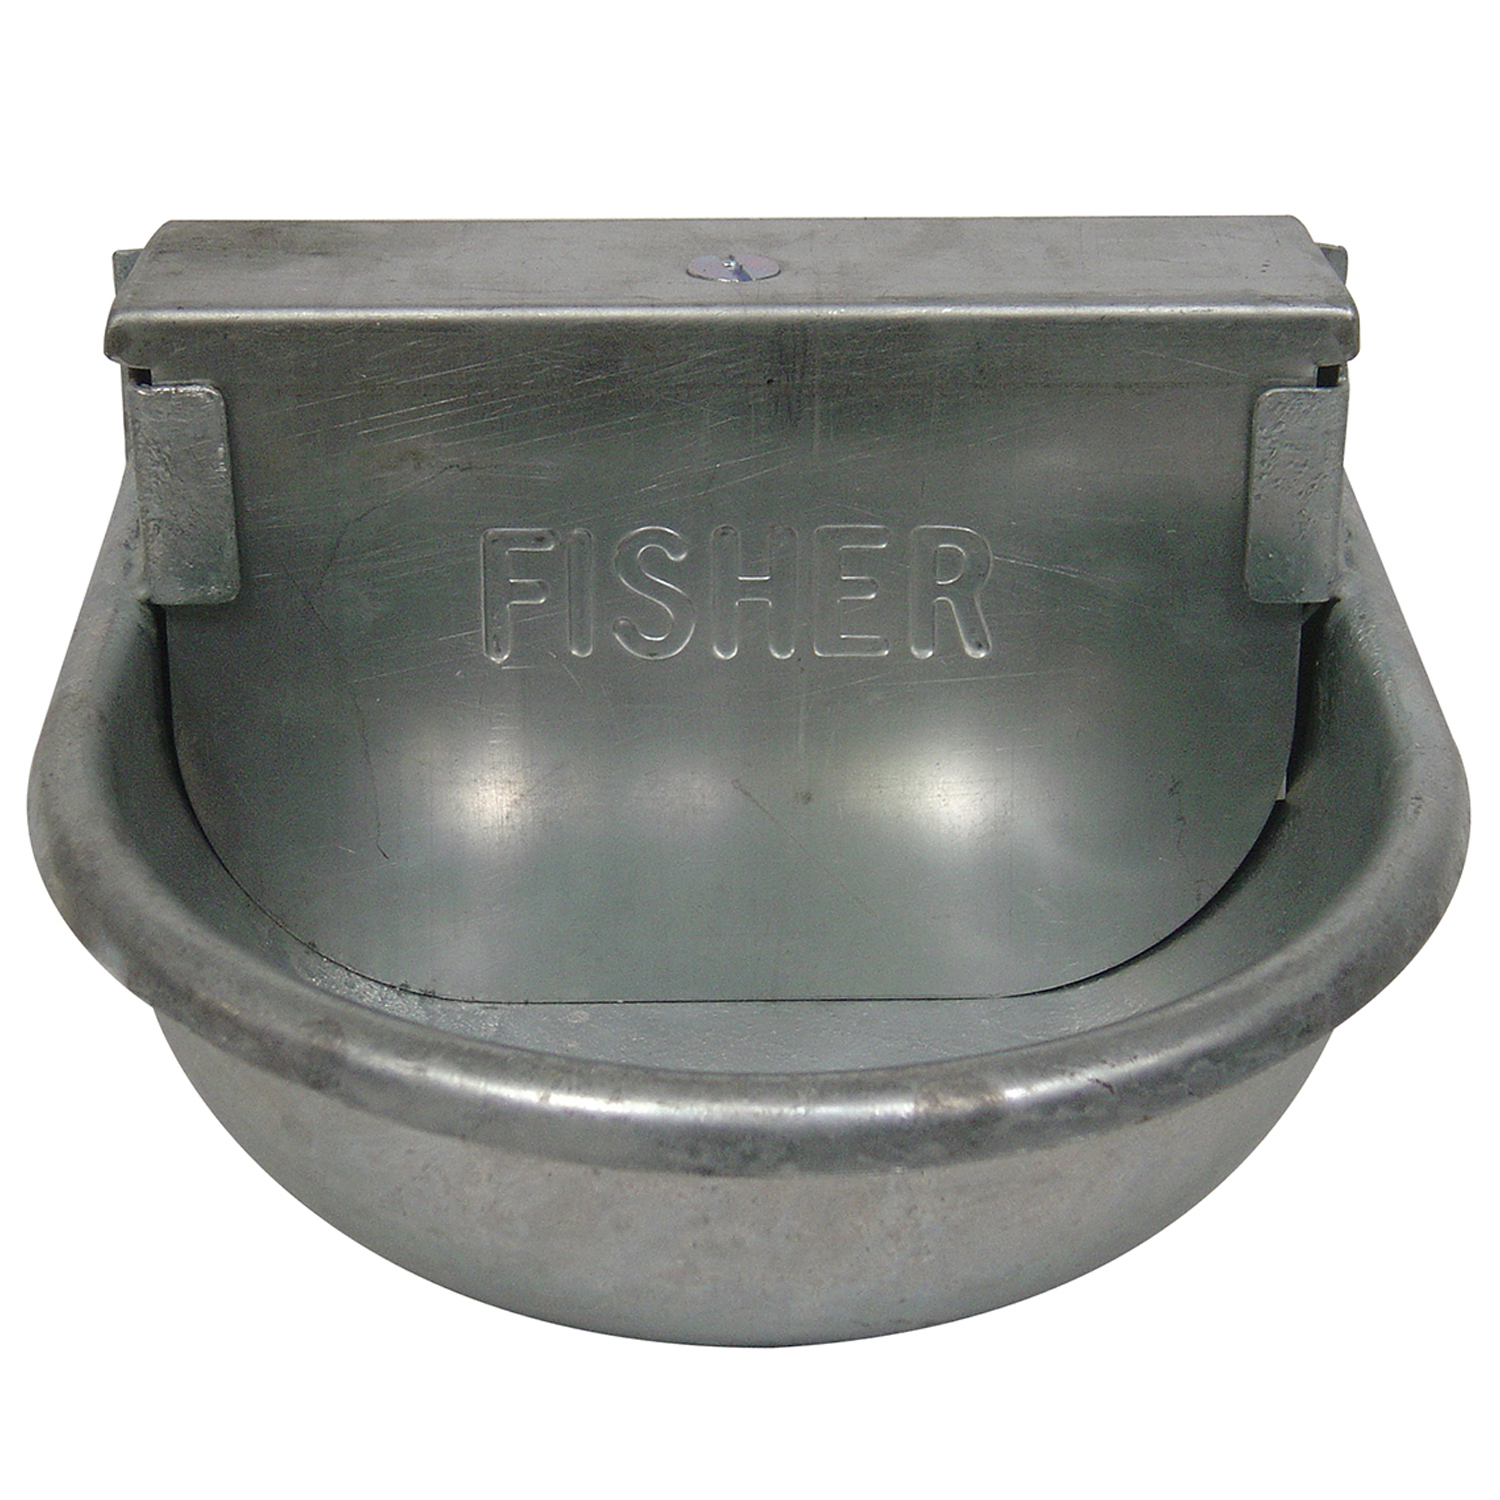 FISHER ALVIN A102 DRINKER ONE SIZE